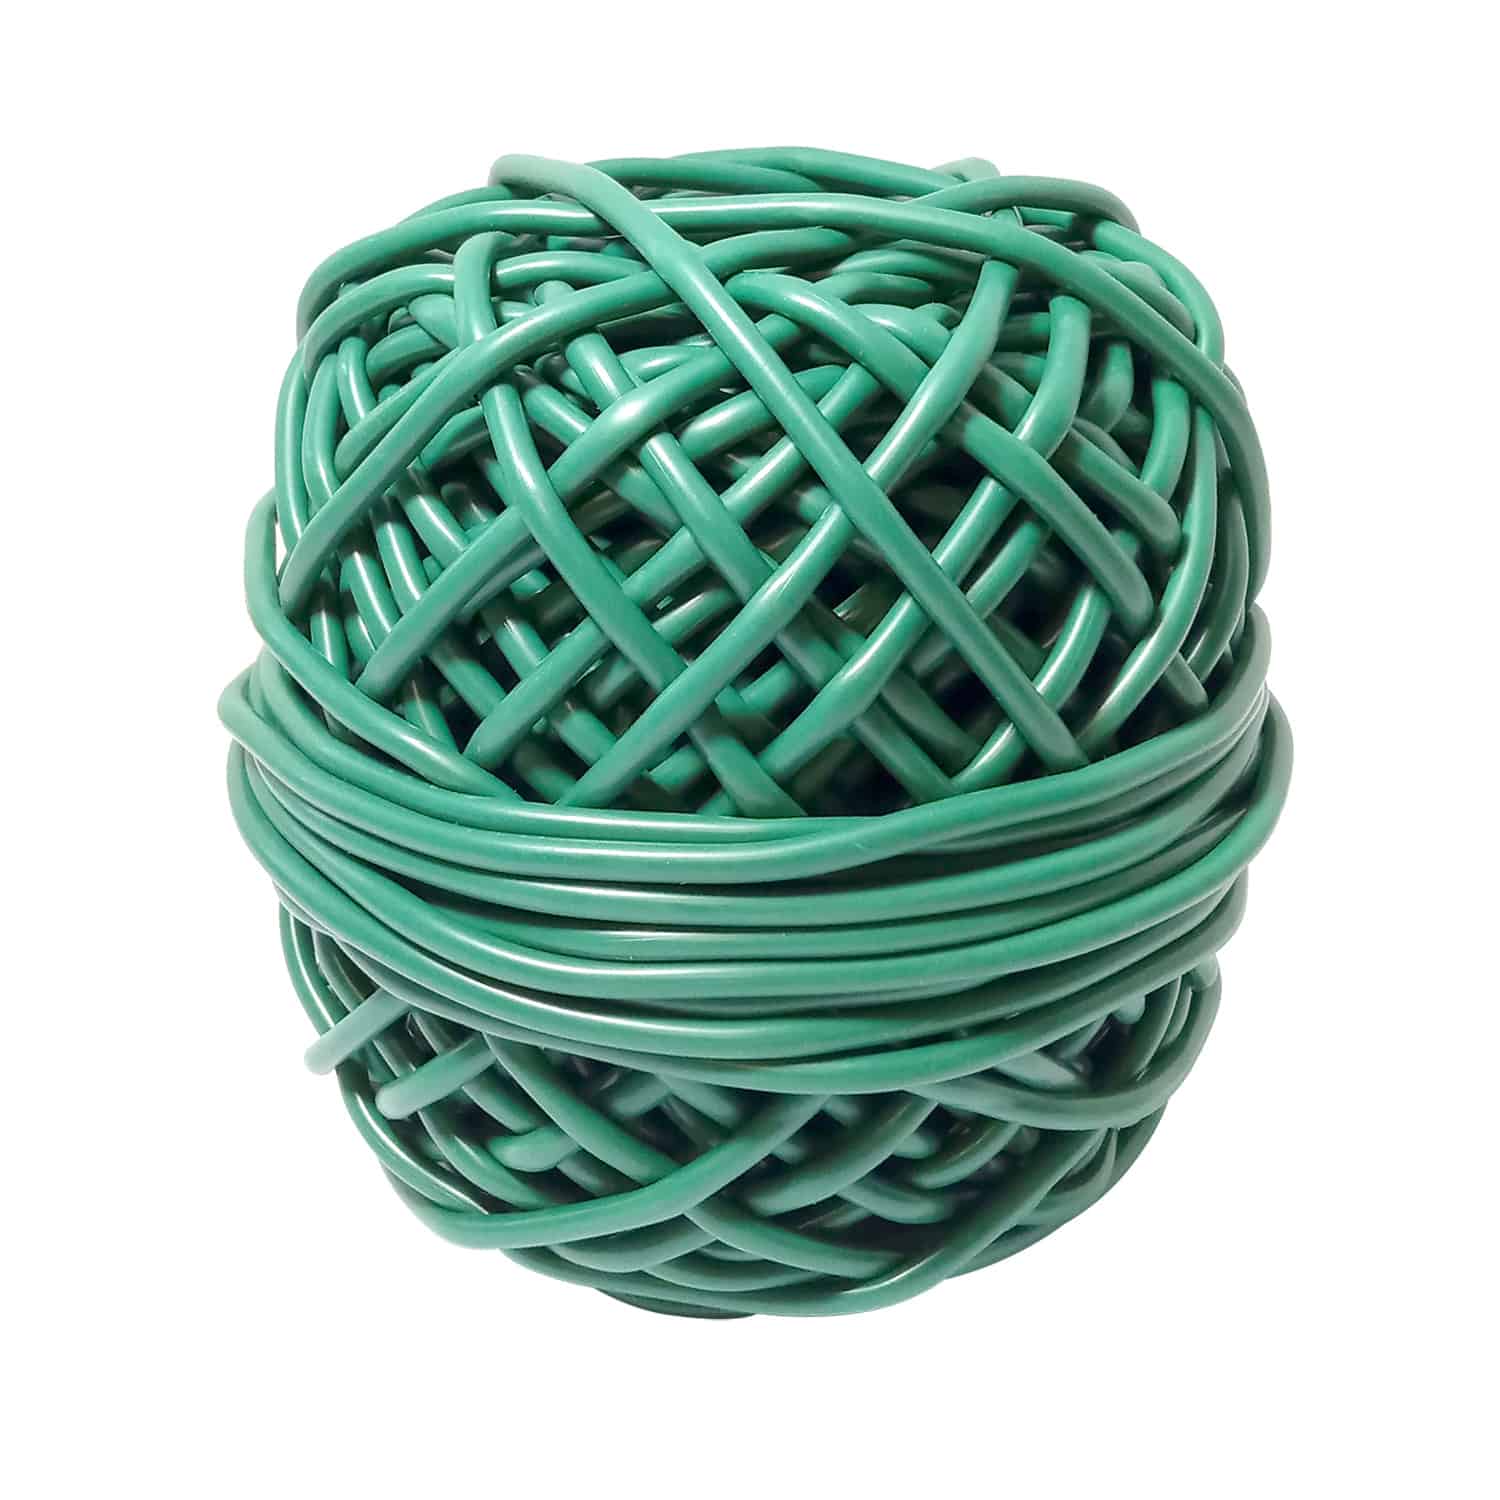 Flexi-Tie-The stretchy garden string/twine/tube that's kind to your plants 